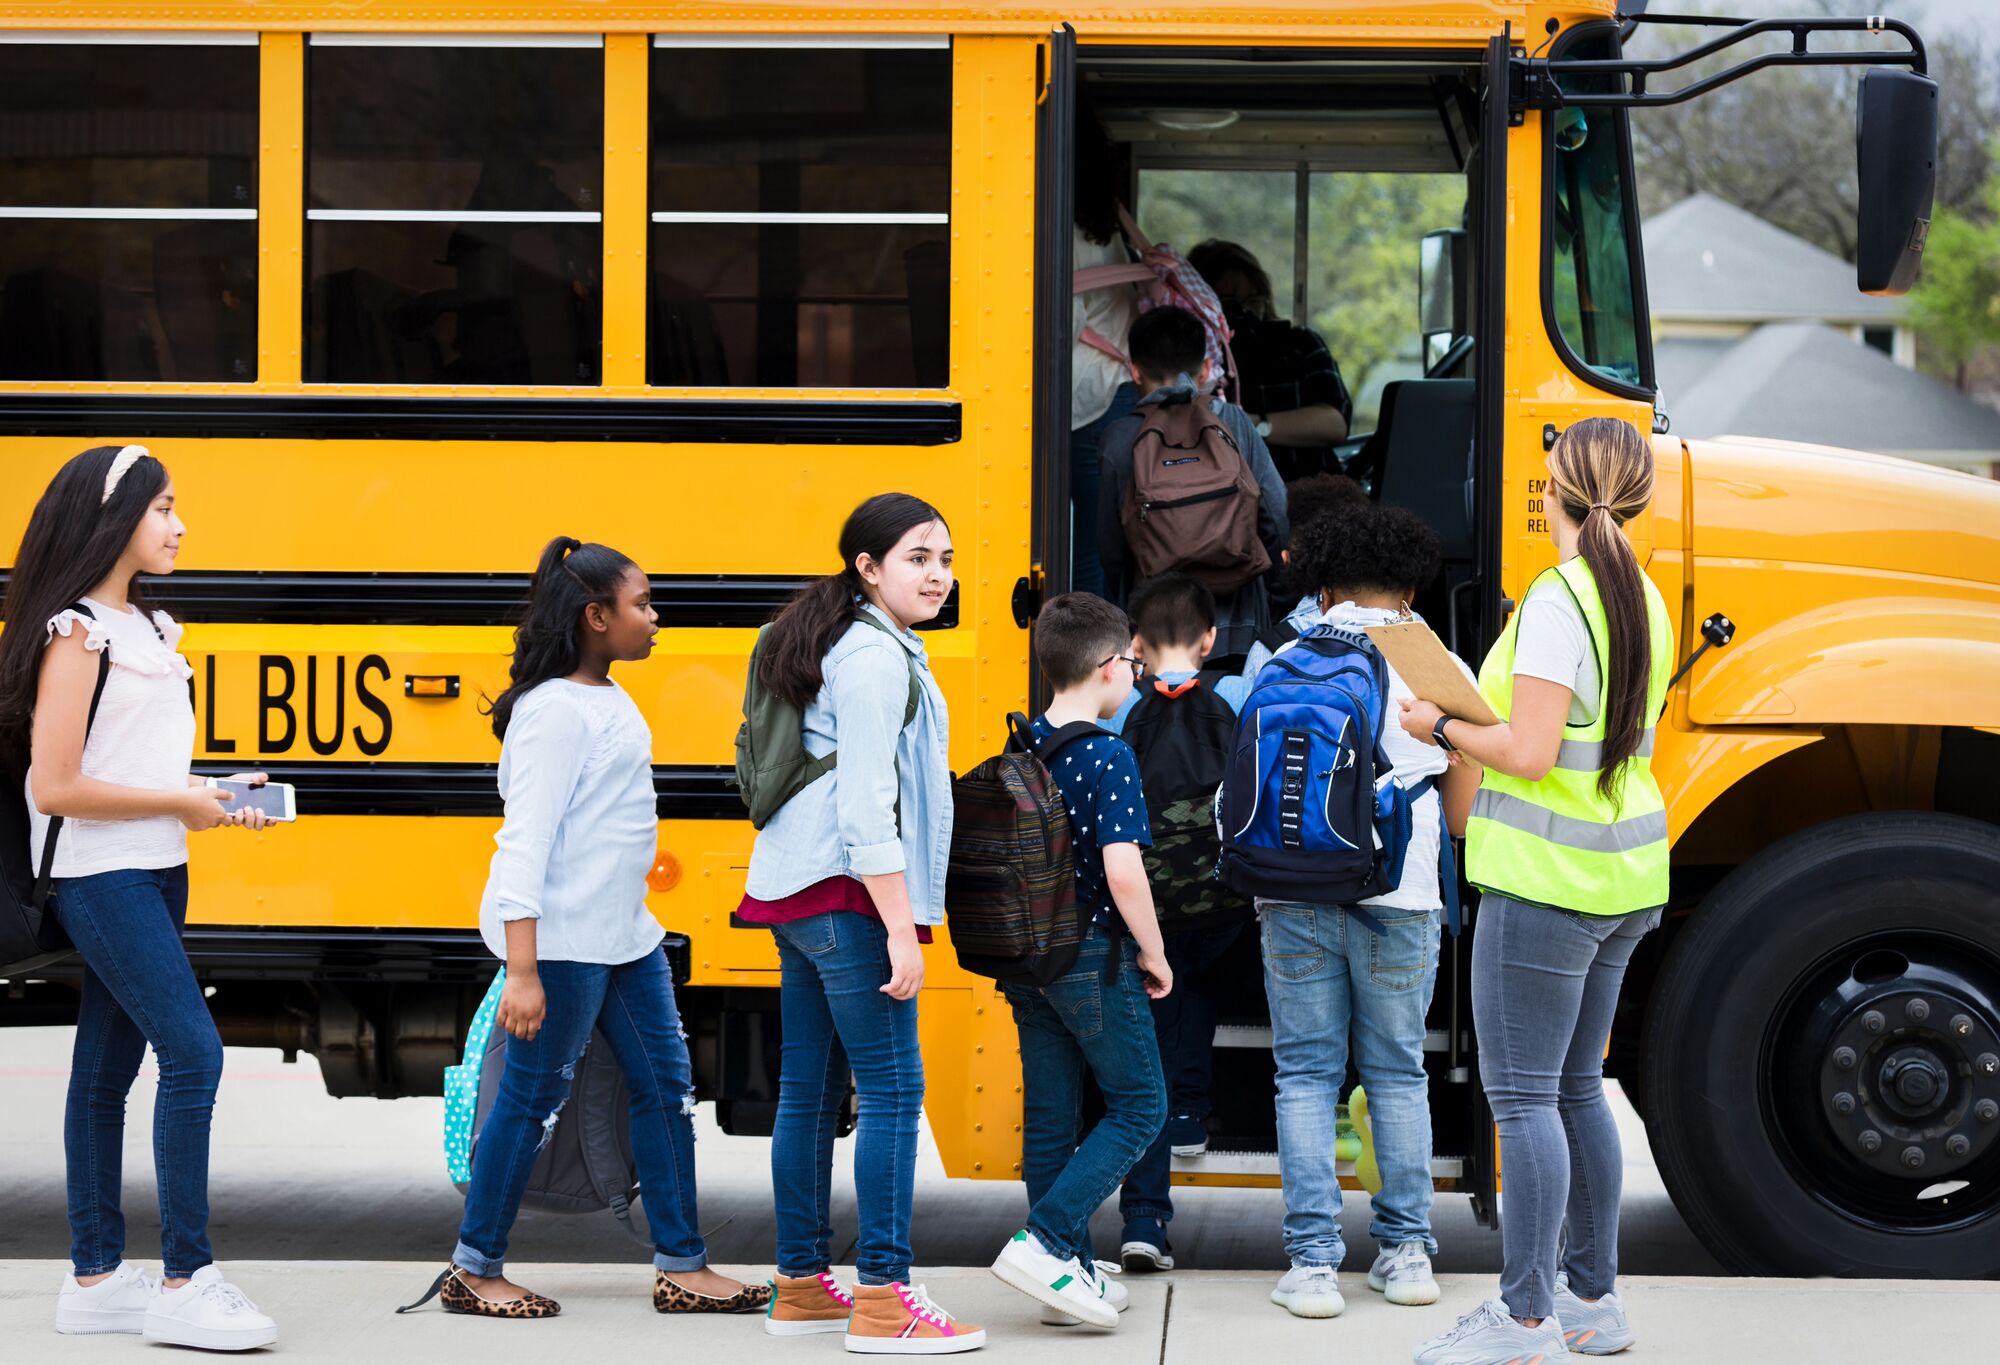 Led by a chaperone, a group of school children board a yellow school bus.